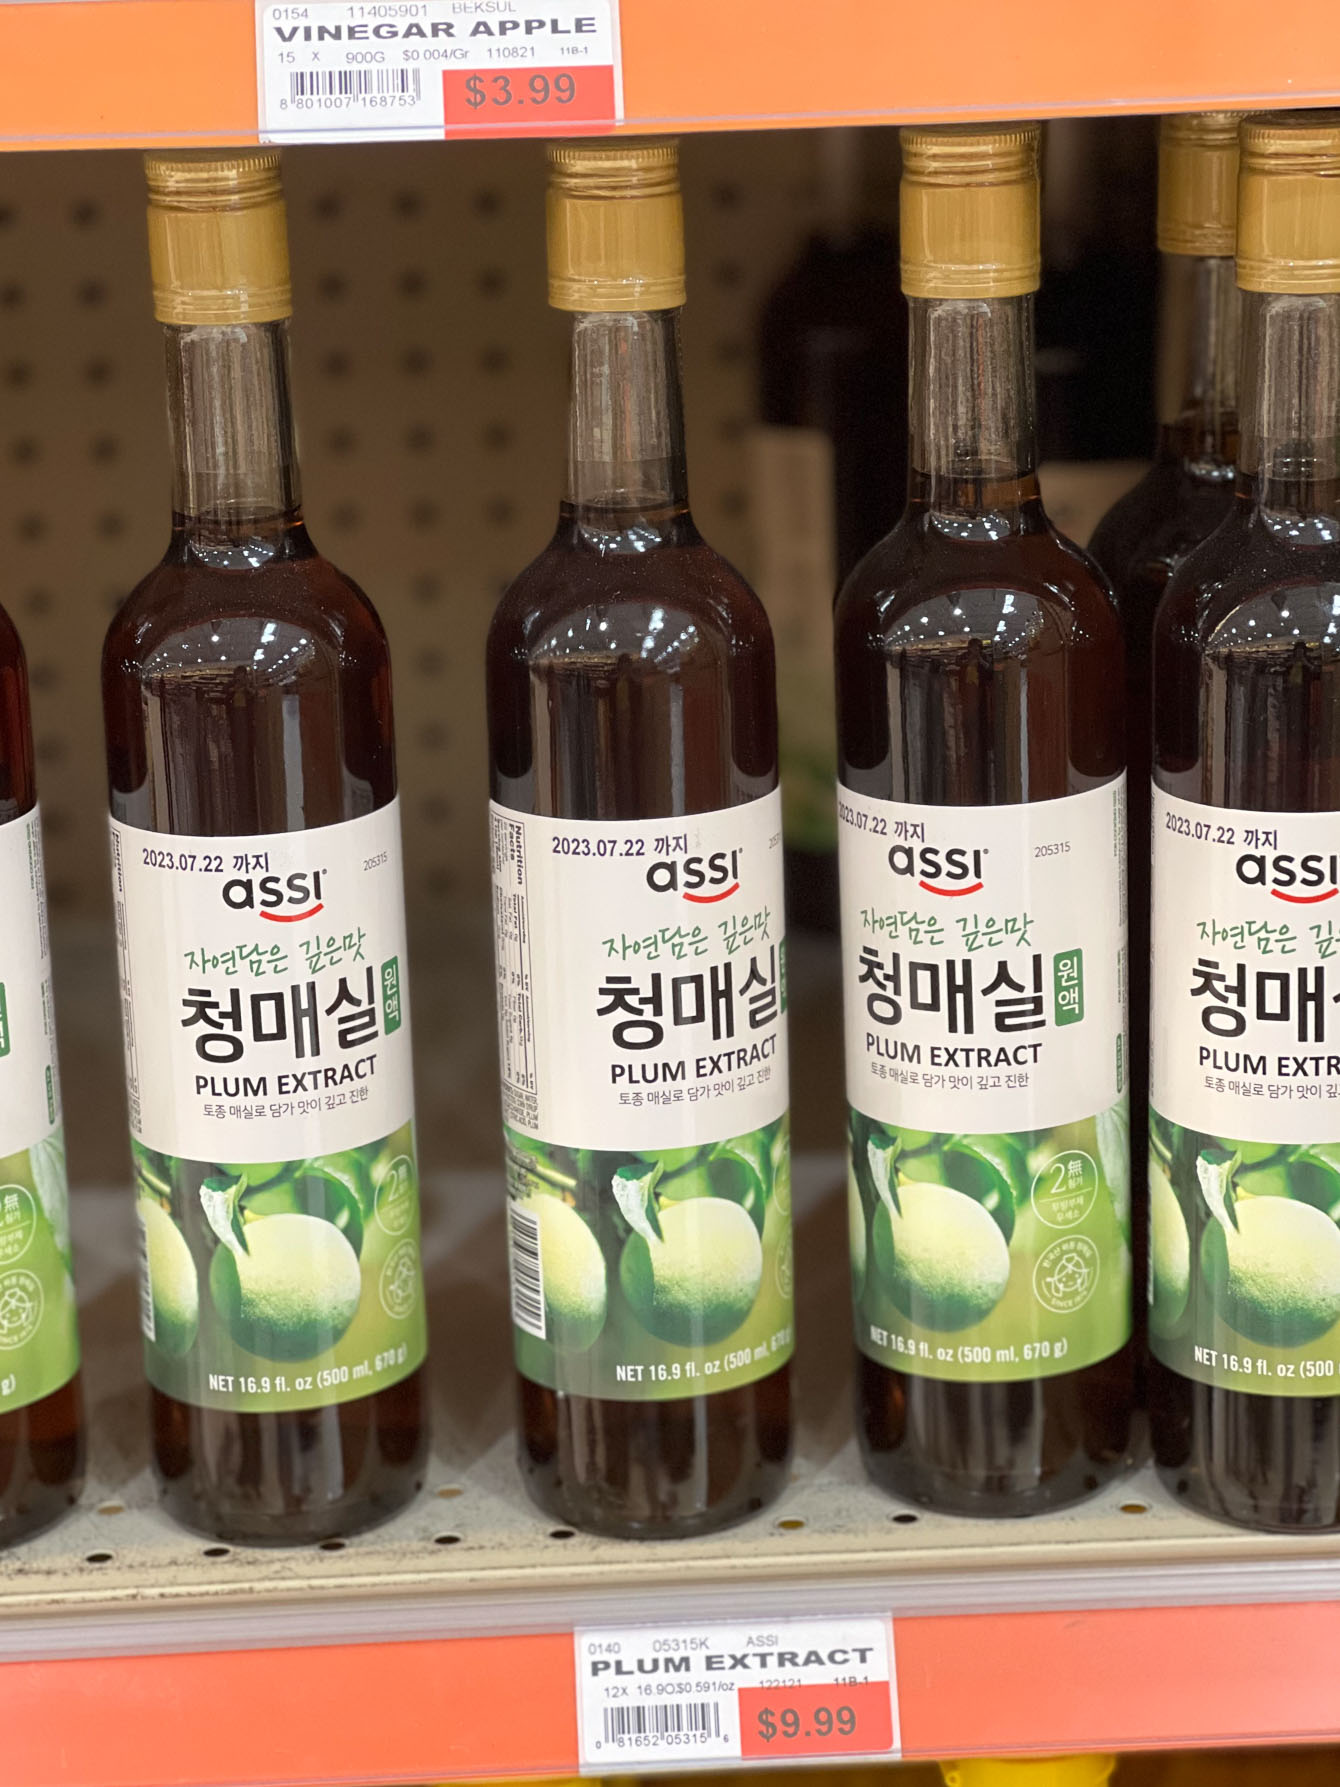 Bottles of Korean plum extracts are presented as Korean condiments.